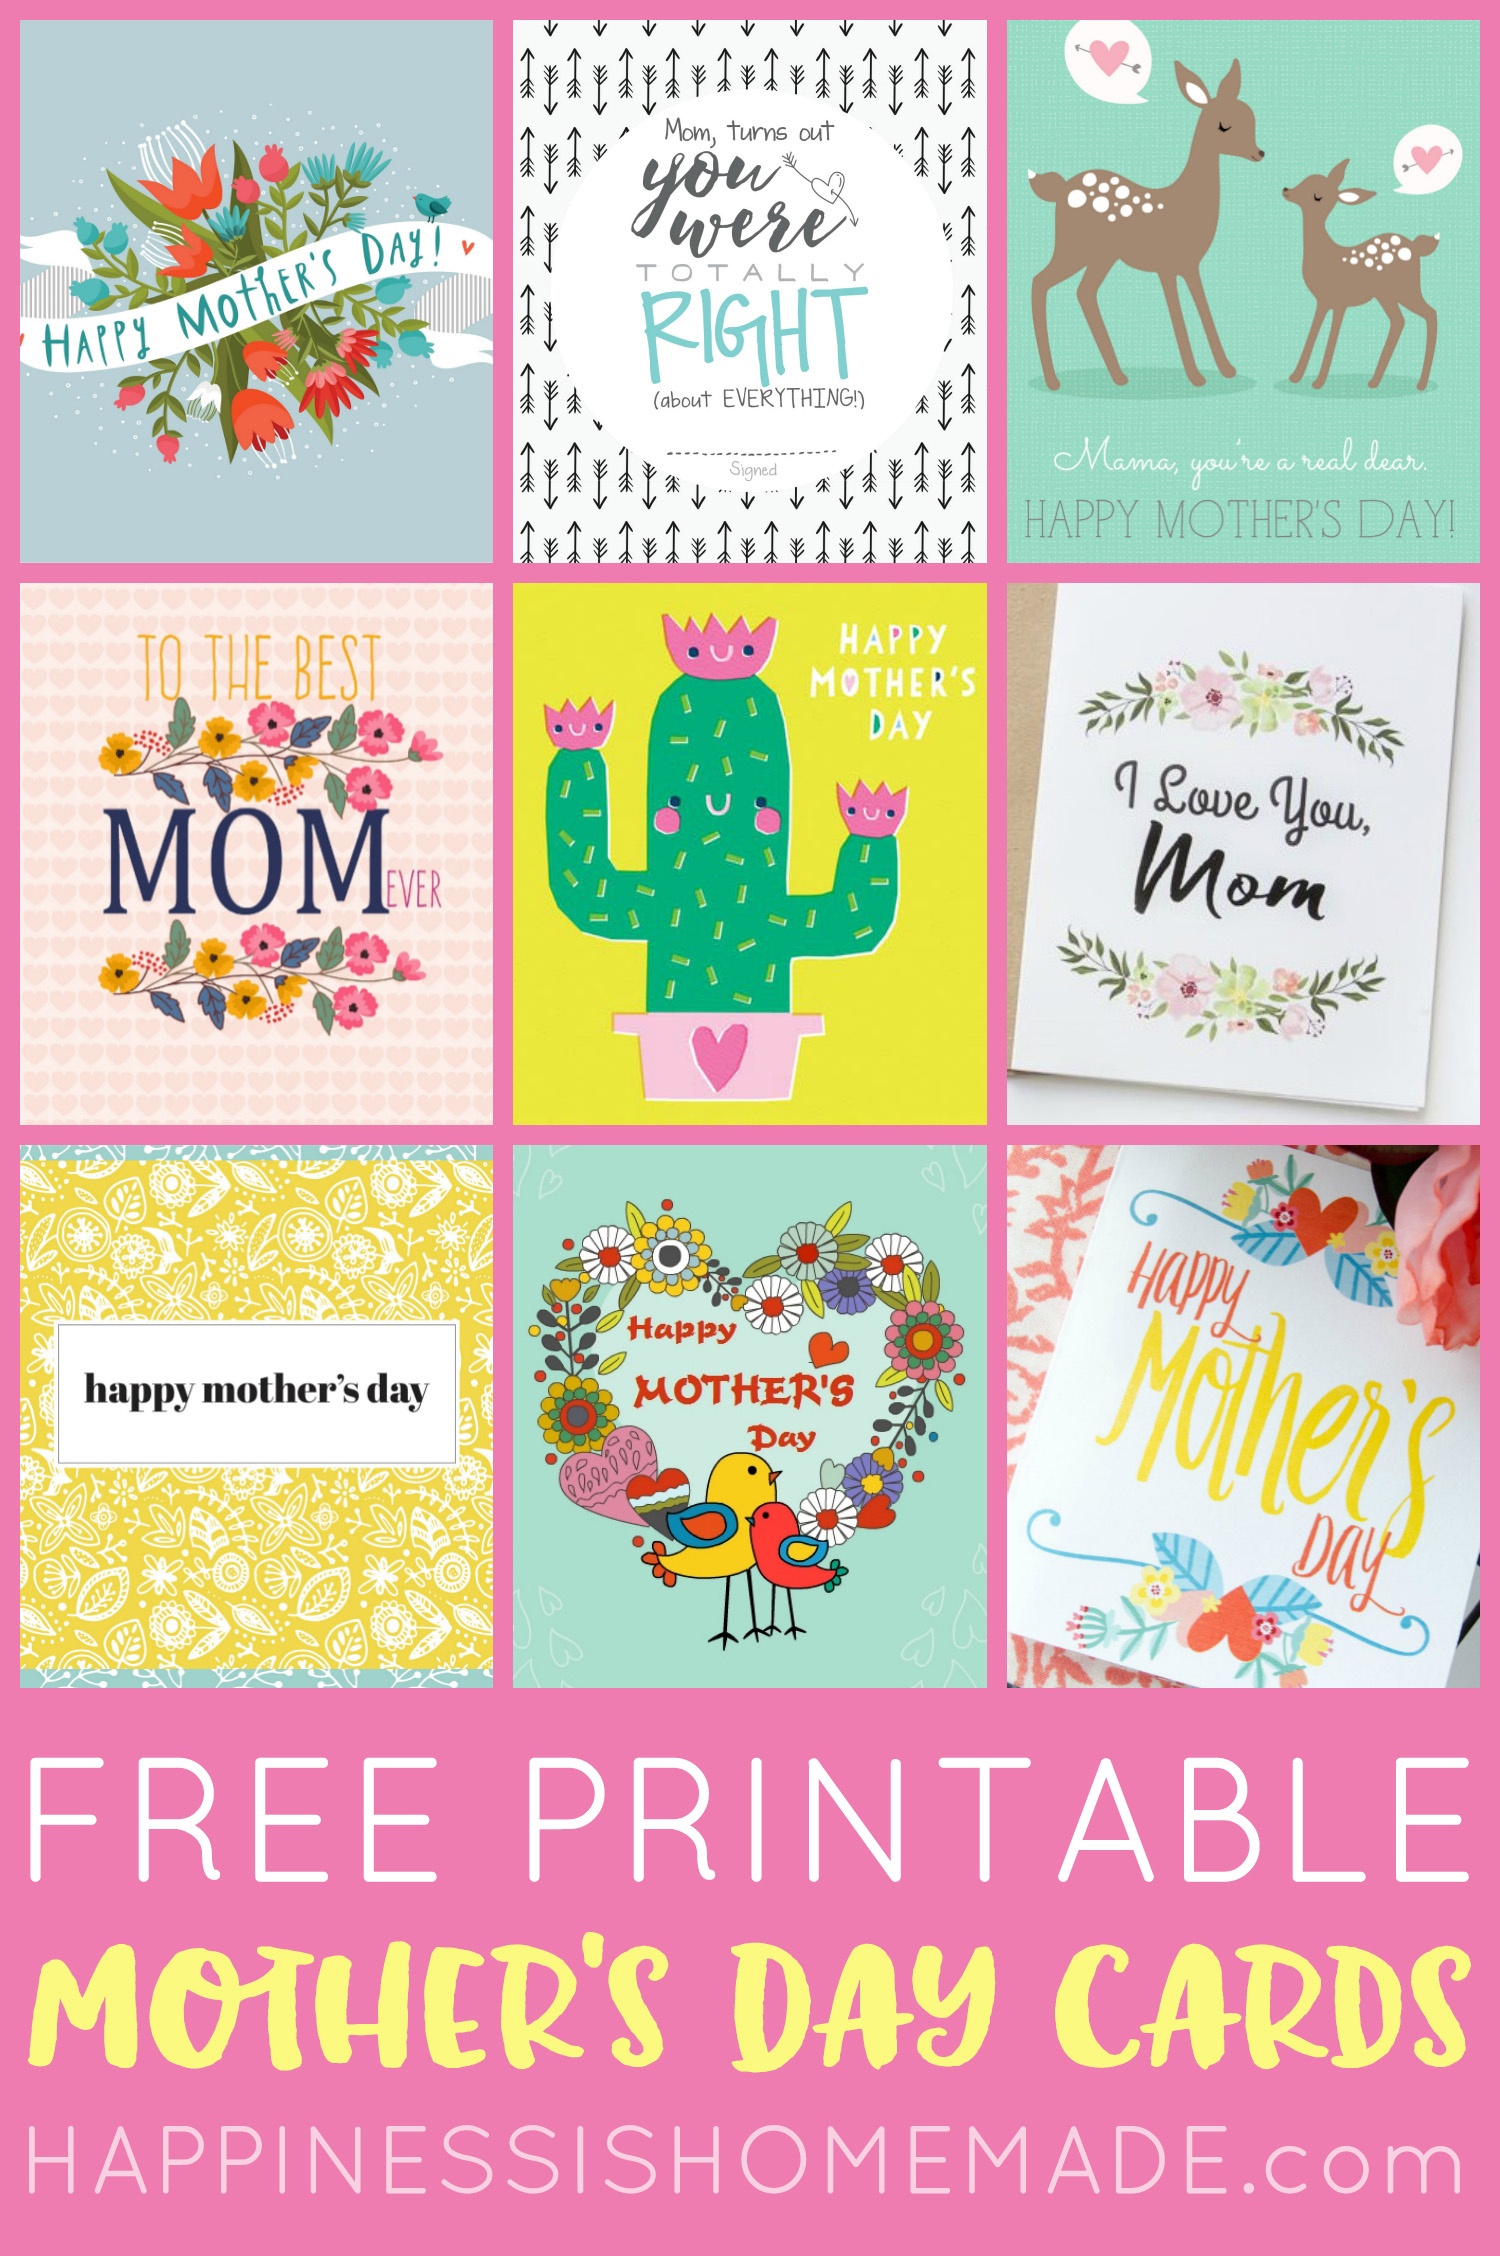 Free Printable Mother&amp;#039;s Day Cards - Happiness Is Homemade - Free Printable Images